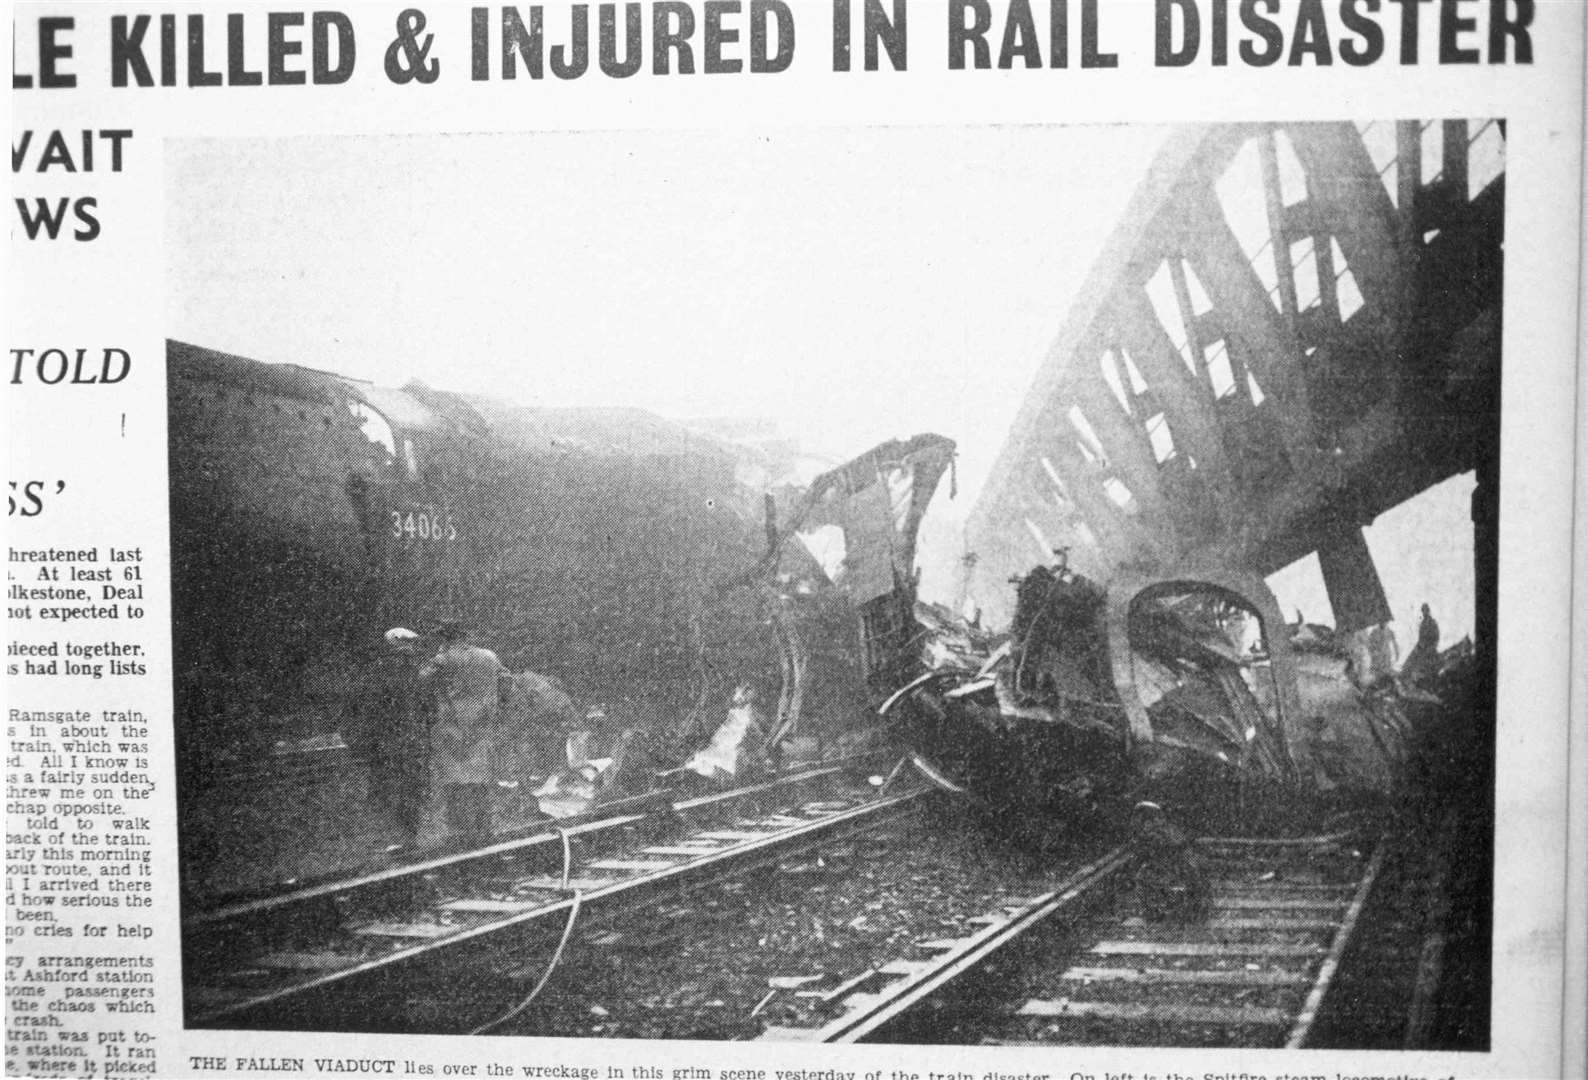 A triple rail disaster at Lewisham railway station involving two trains from Kent left 92 people dead in December 1957